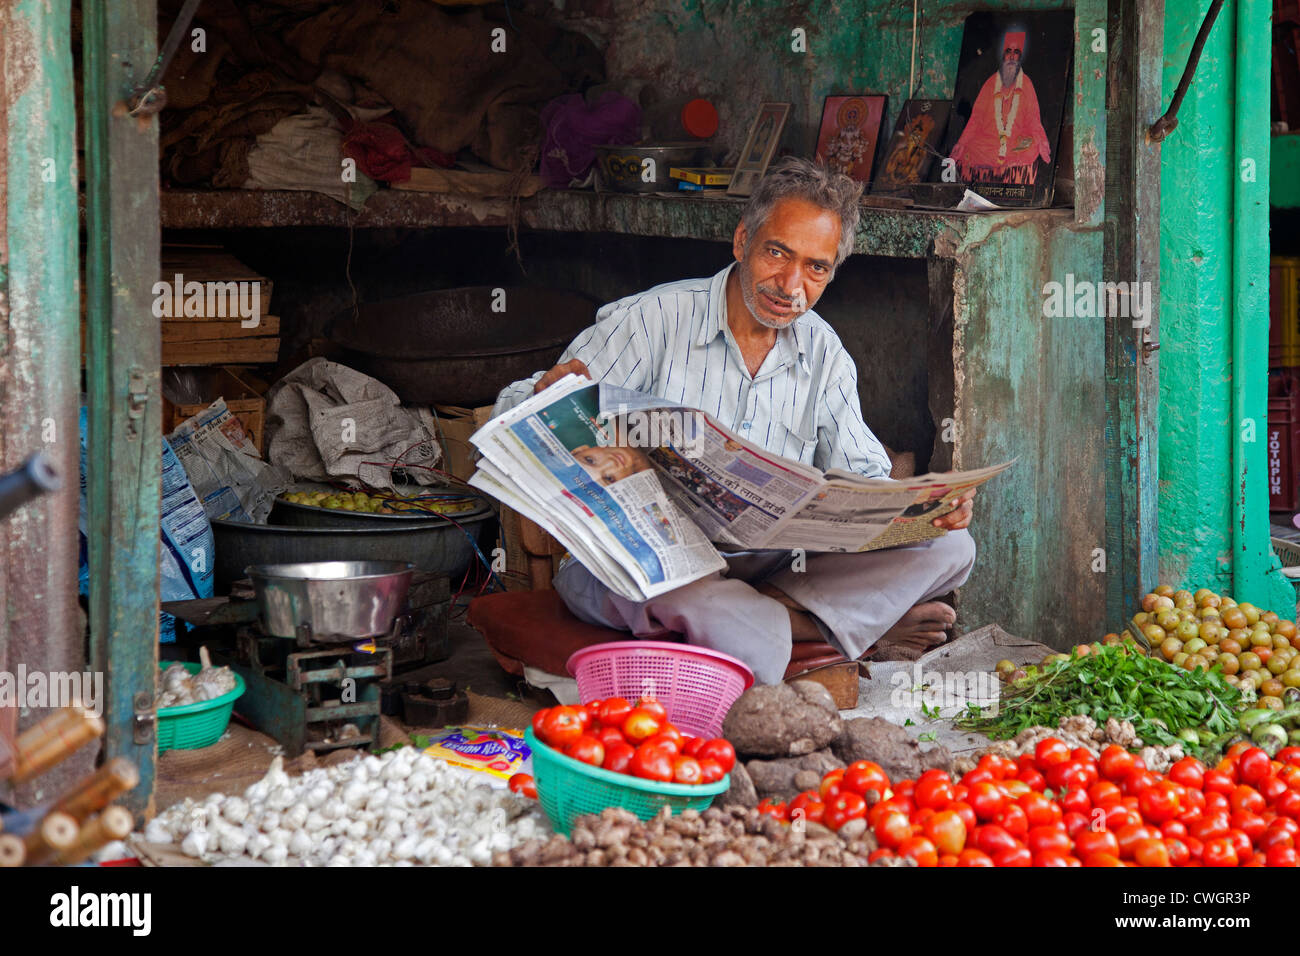 Shopkeeper reading newspaper in grocery shop selling vegetables at Jodhpur, Rajasthan, India Stock Photo